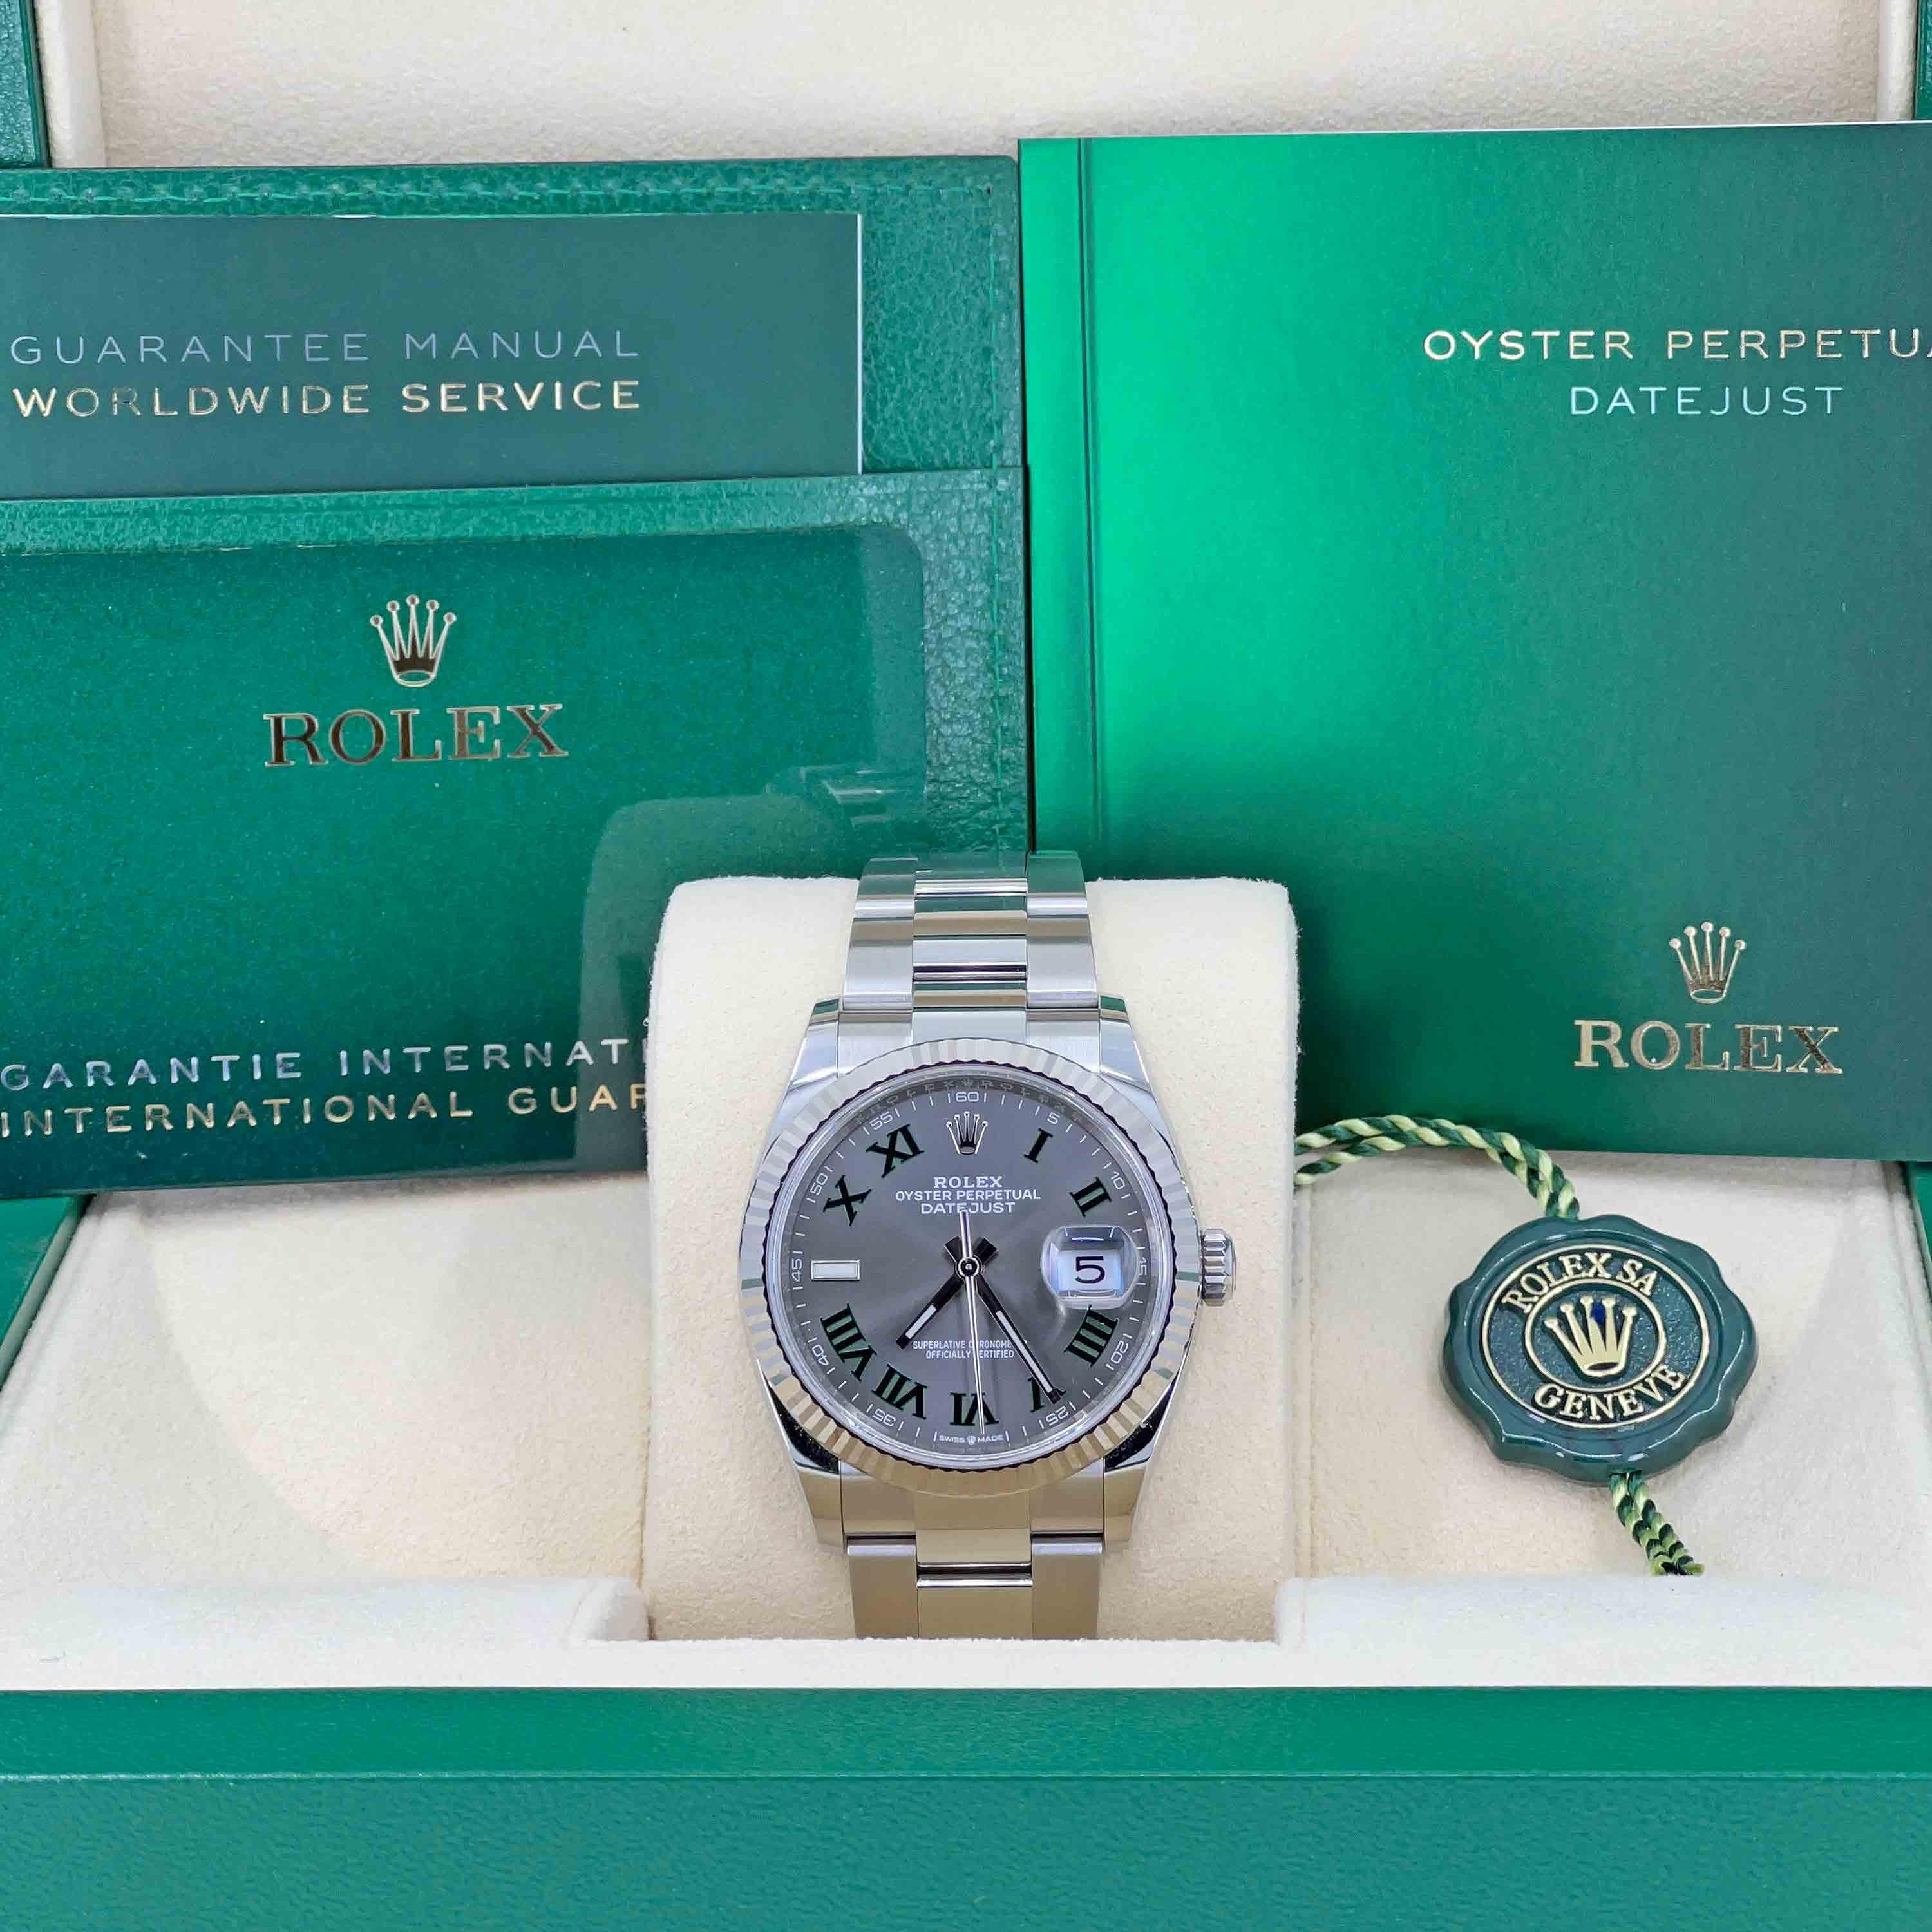 Rolex Steel Datejust 36 Watch - Fluted Bezel - Green Slate Dial - Oyster Bracelet

This watch is unworn with no signs of wear and comes with an original Rolex watch box, Manual and Warranty booklets, green COSC tag and Rolex Warranty Card. Neither